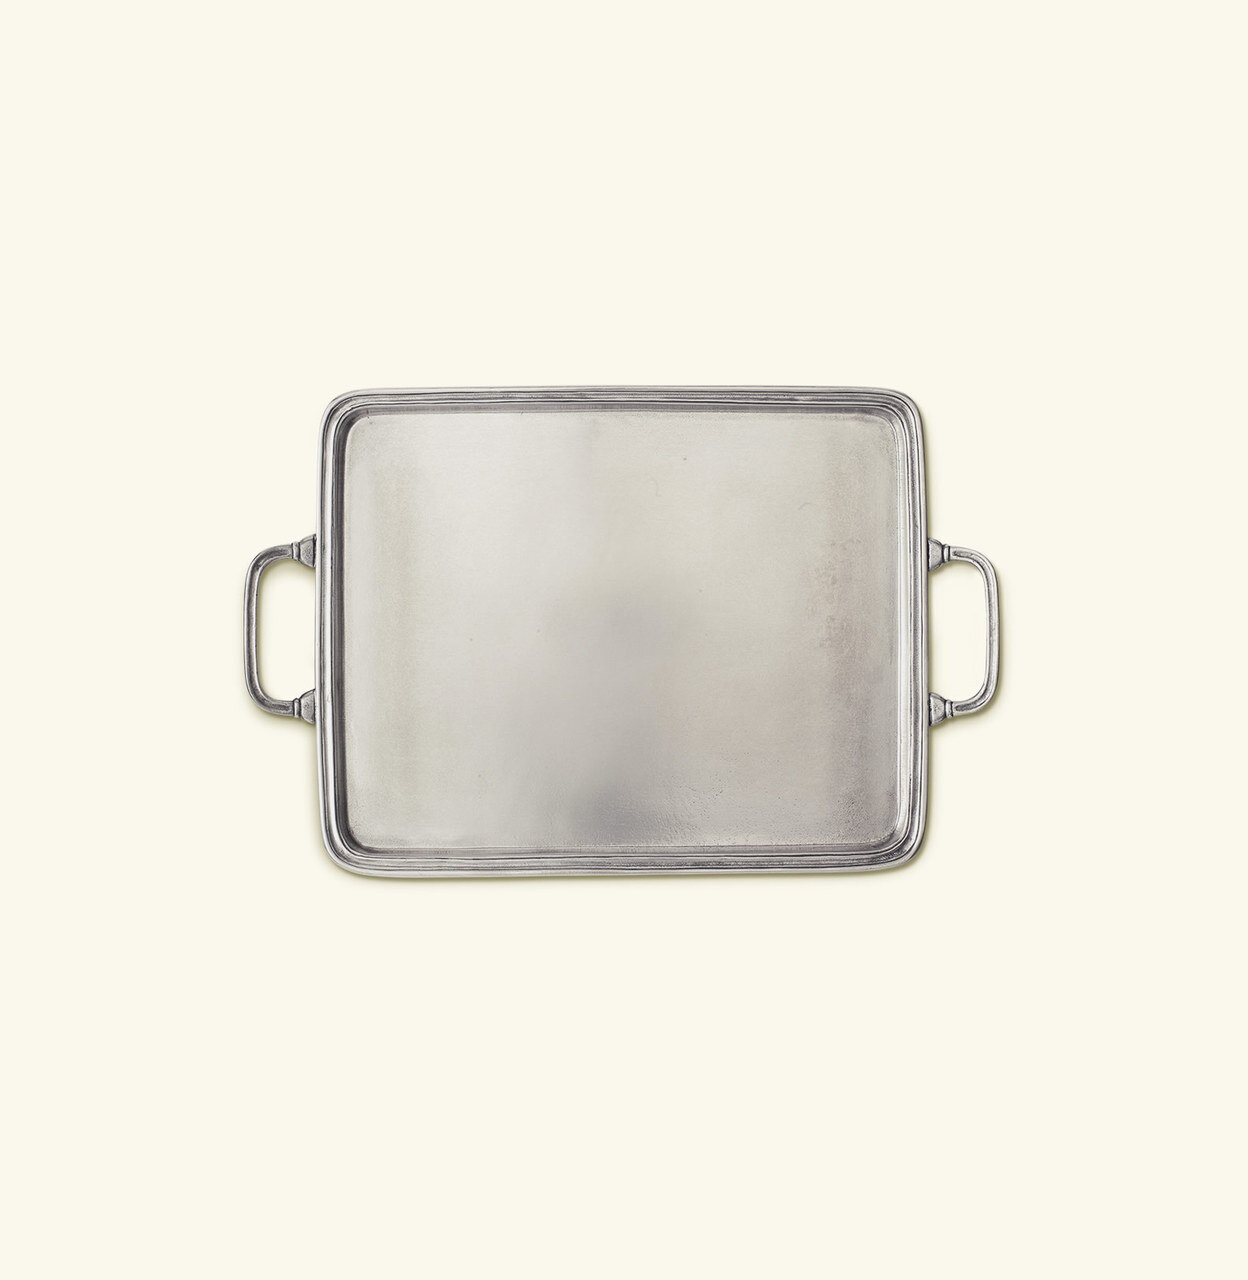 Match Pewter Rectangle Tray With Handles Medium 964.4